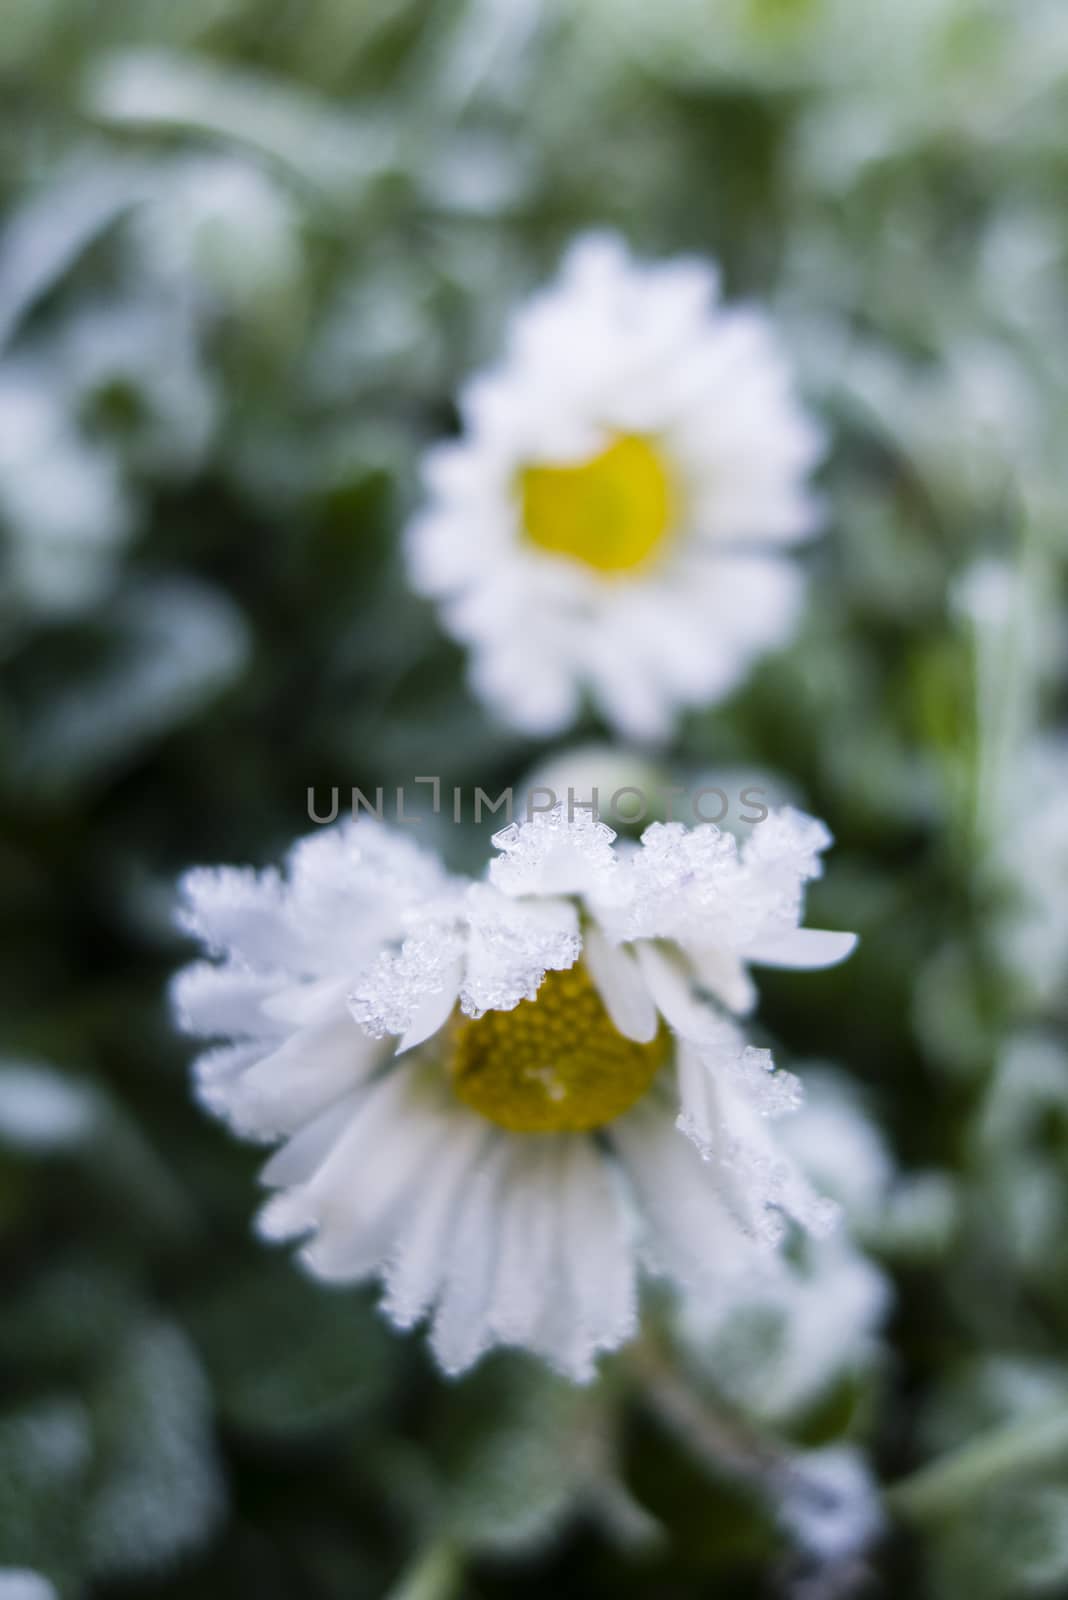 Early morning frost on grass and daisy by AlessandroZocc